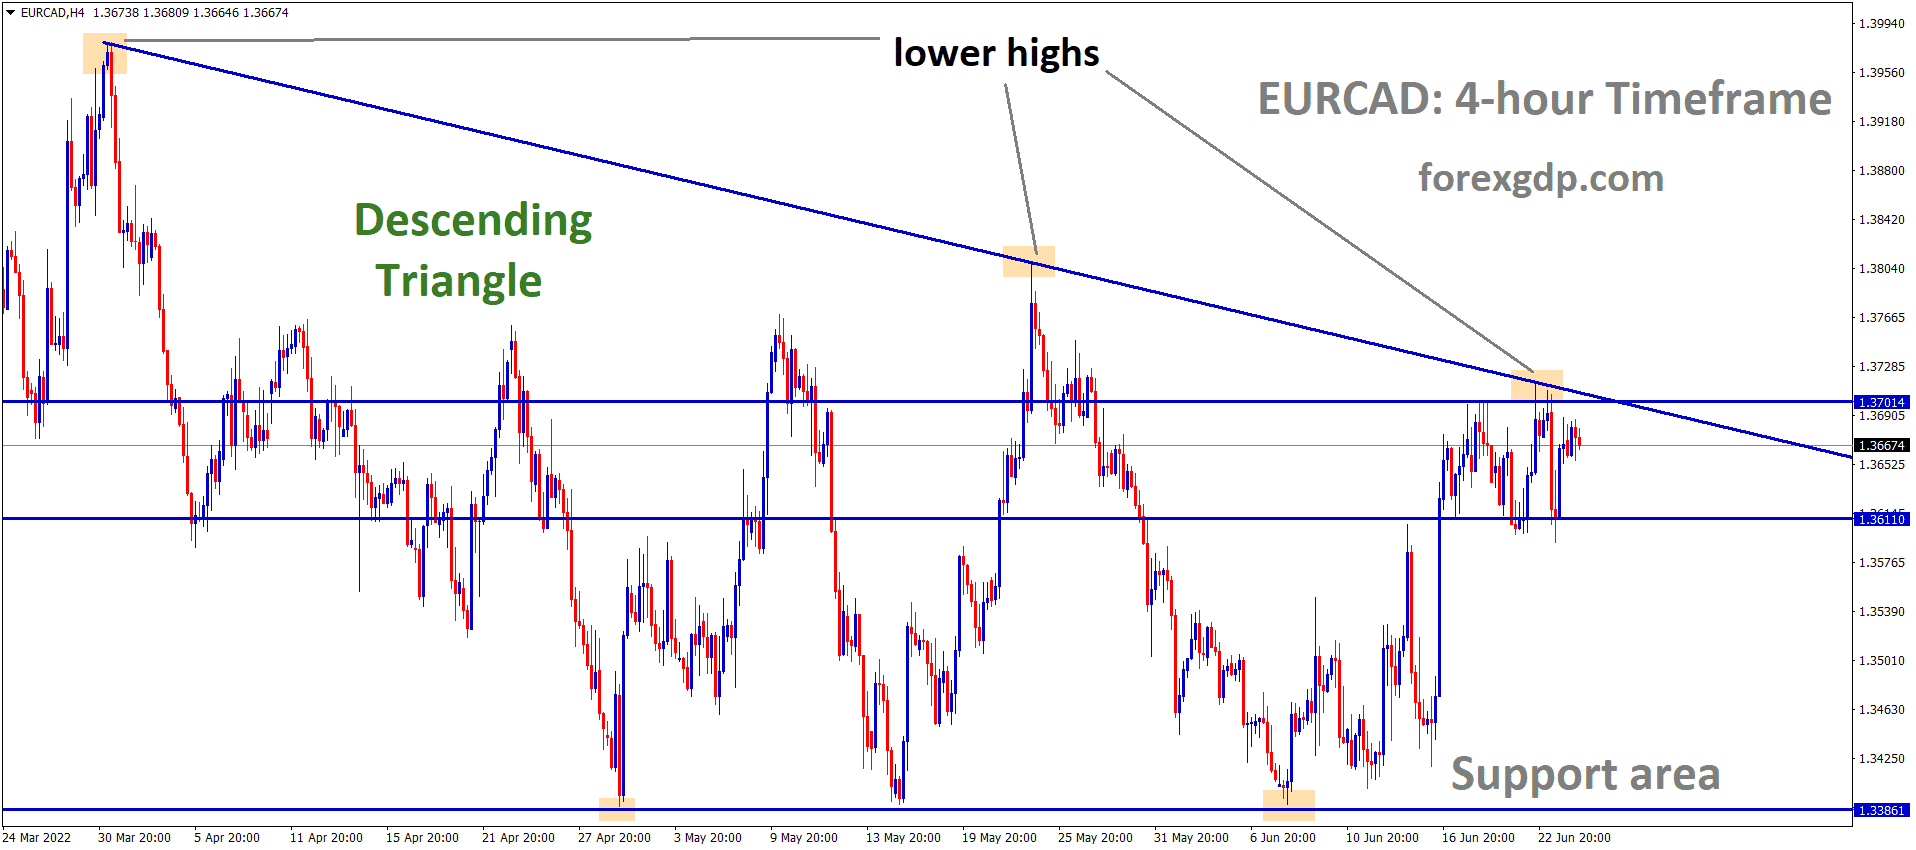 EURCAD is moving in the Descending triangle pattern and the Market has Fallen from the Lower high area of the Pattern.